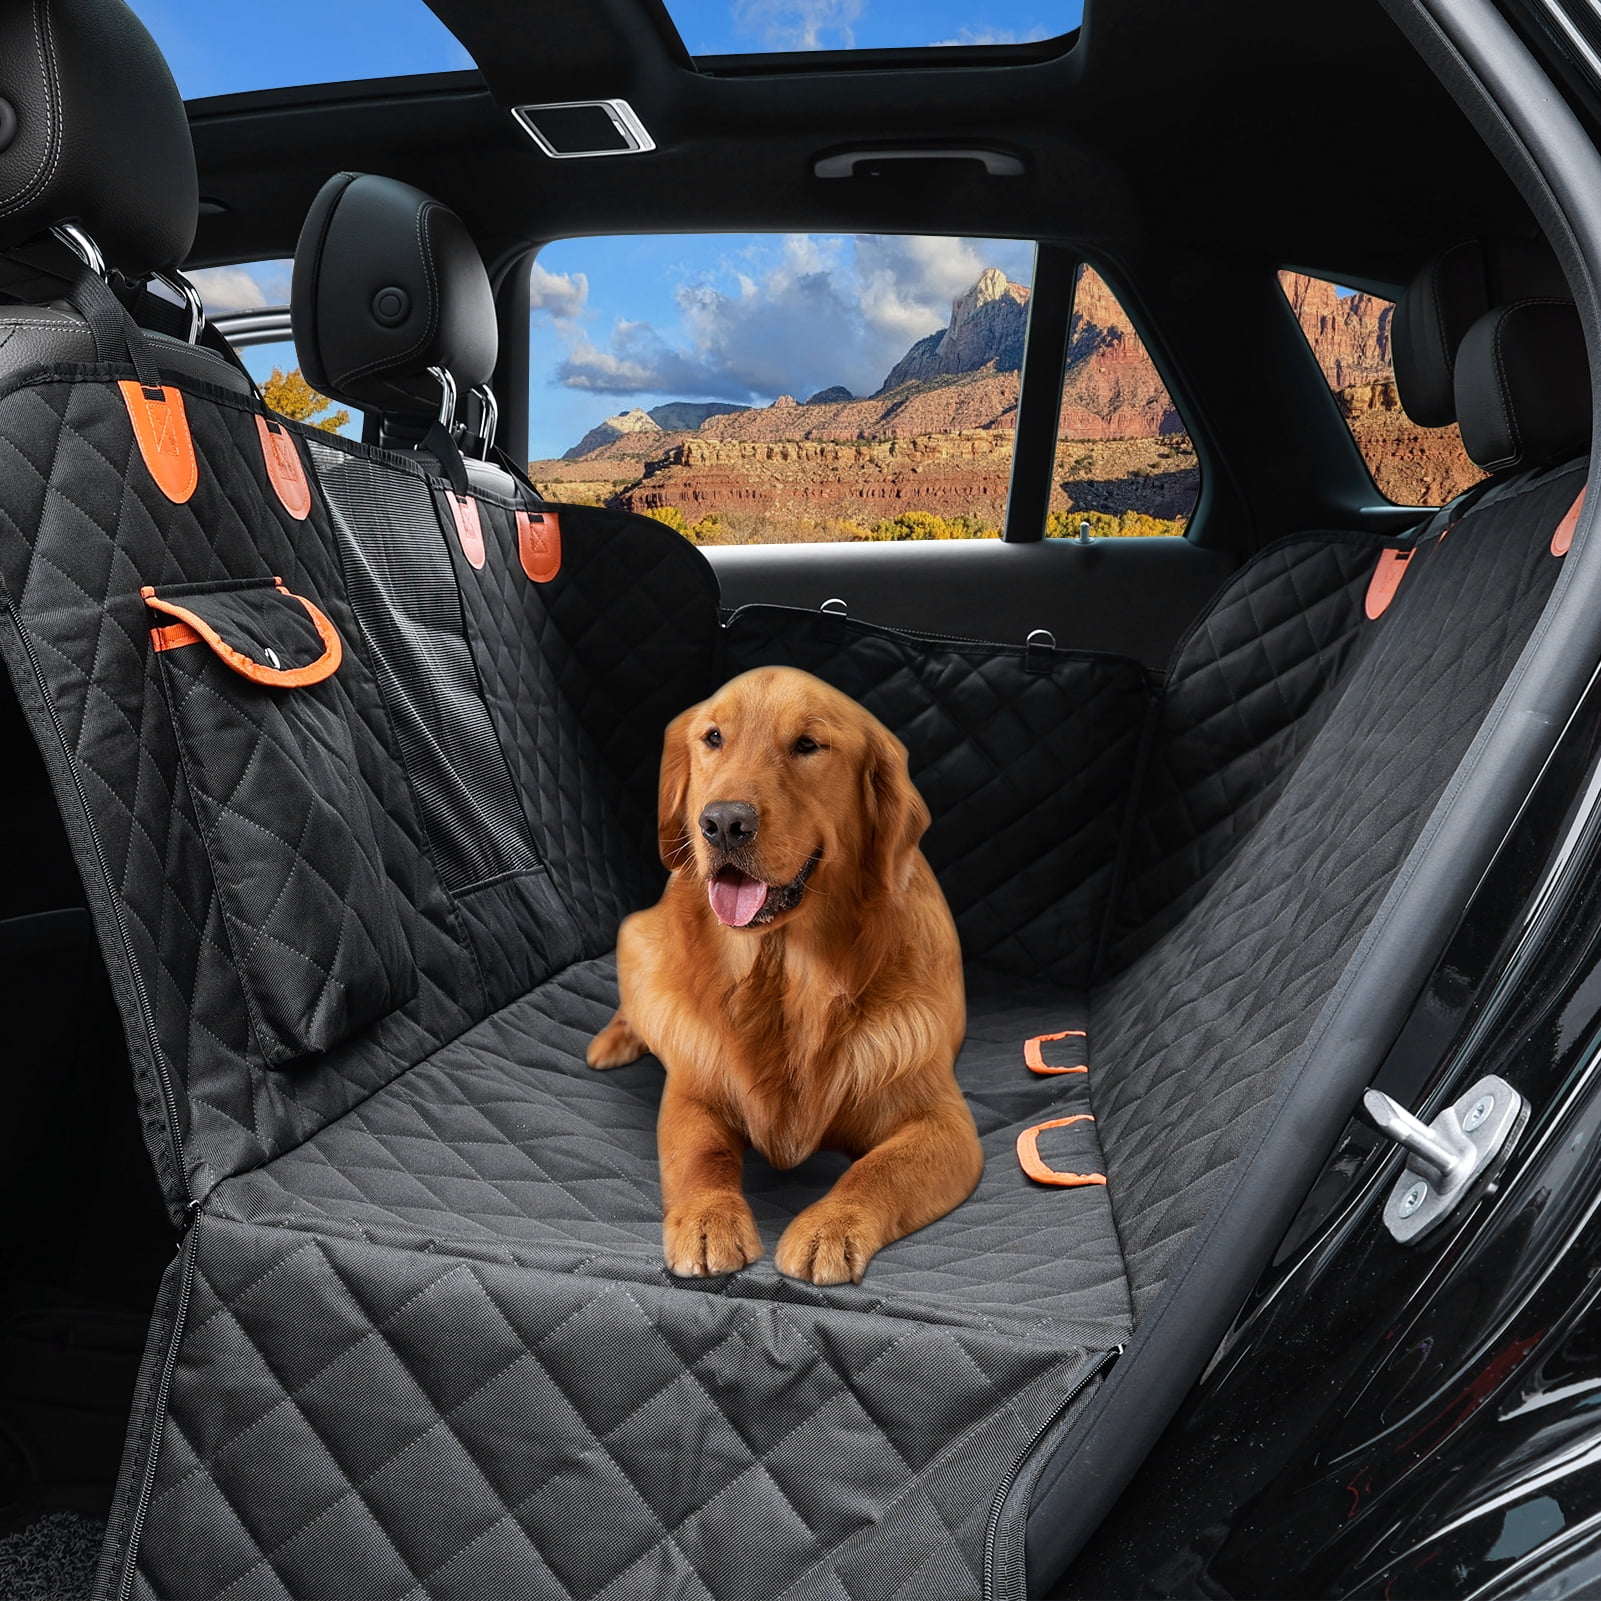 Giomoc Dog Car Seat Cover for Back Seat, Waterproof Seat Protector  Scratchproof Pet Hammock with 4 Bags Side Flaps, Washable Nonslip Backseat